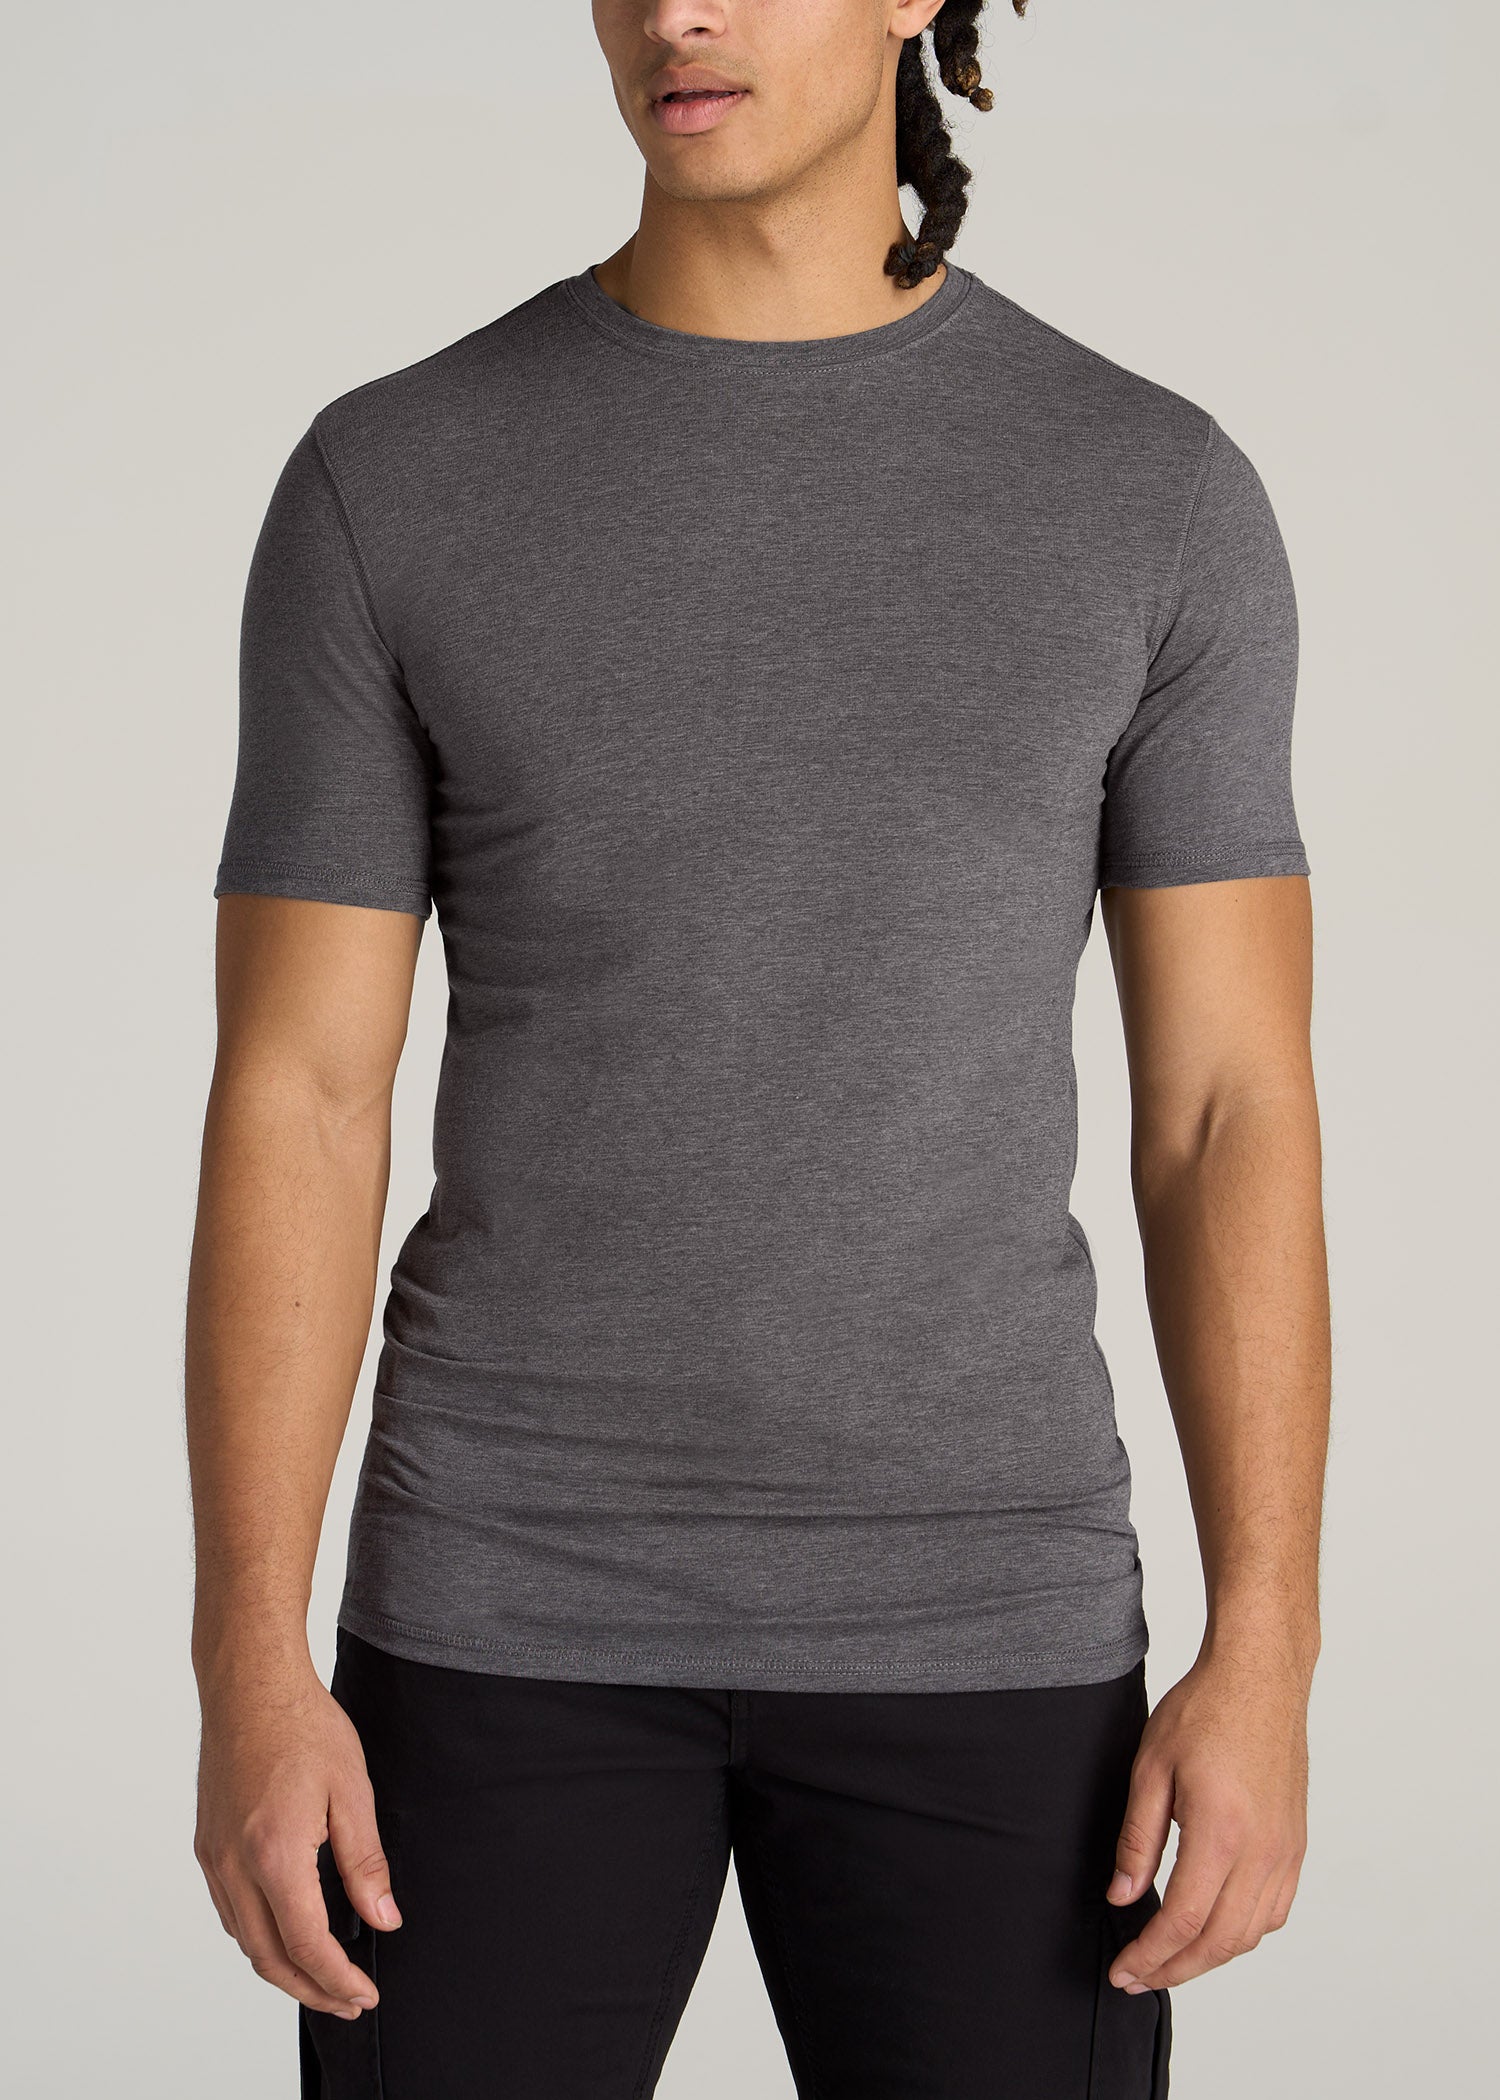 The Essential SLIM-FIT Crewneck Men's Tall Tees in Charcoal Mix